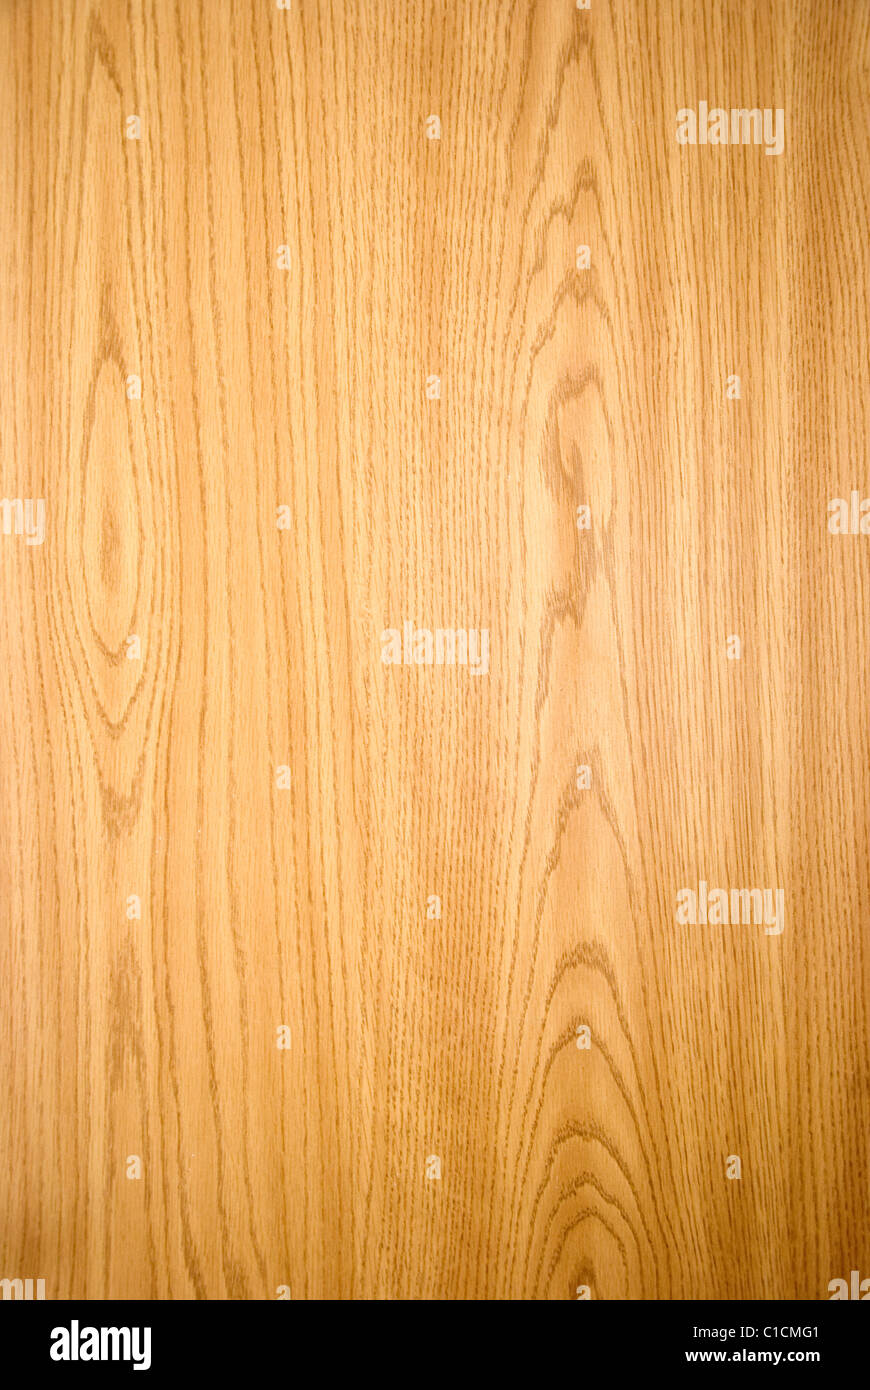 Background of wood imitation with grained textures Stock Photo